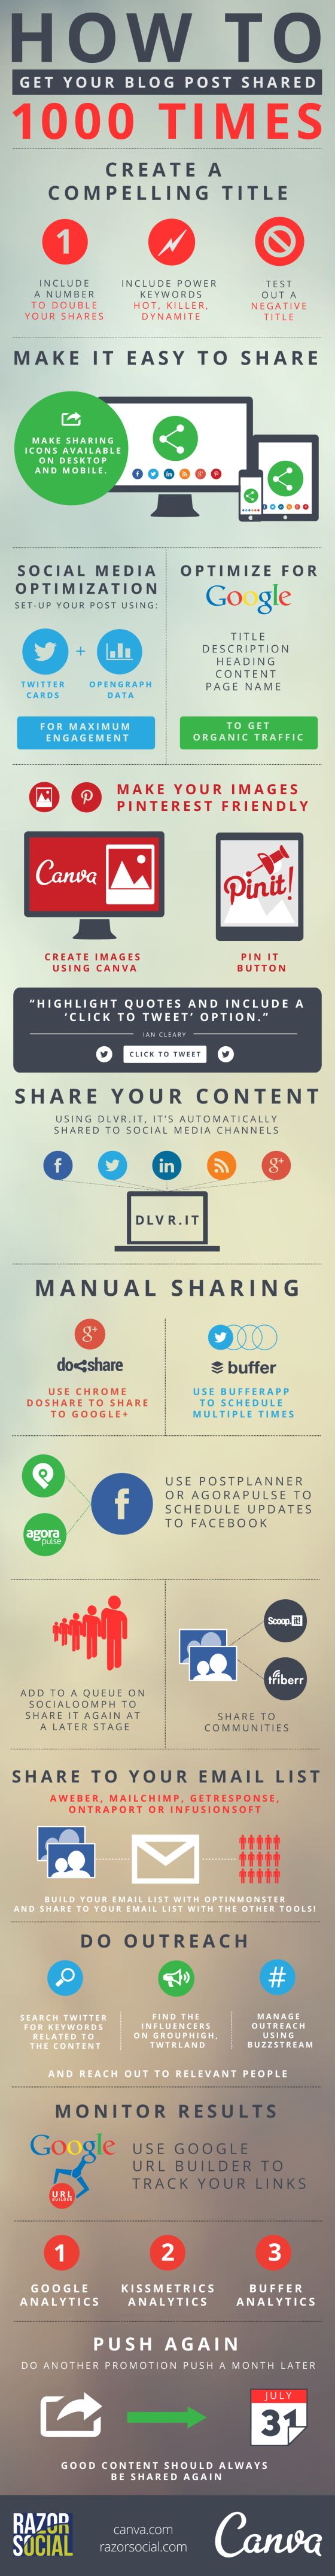 this infographic shows you how to get your blog posts shared way more often